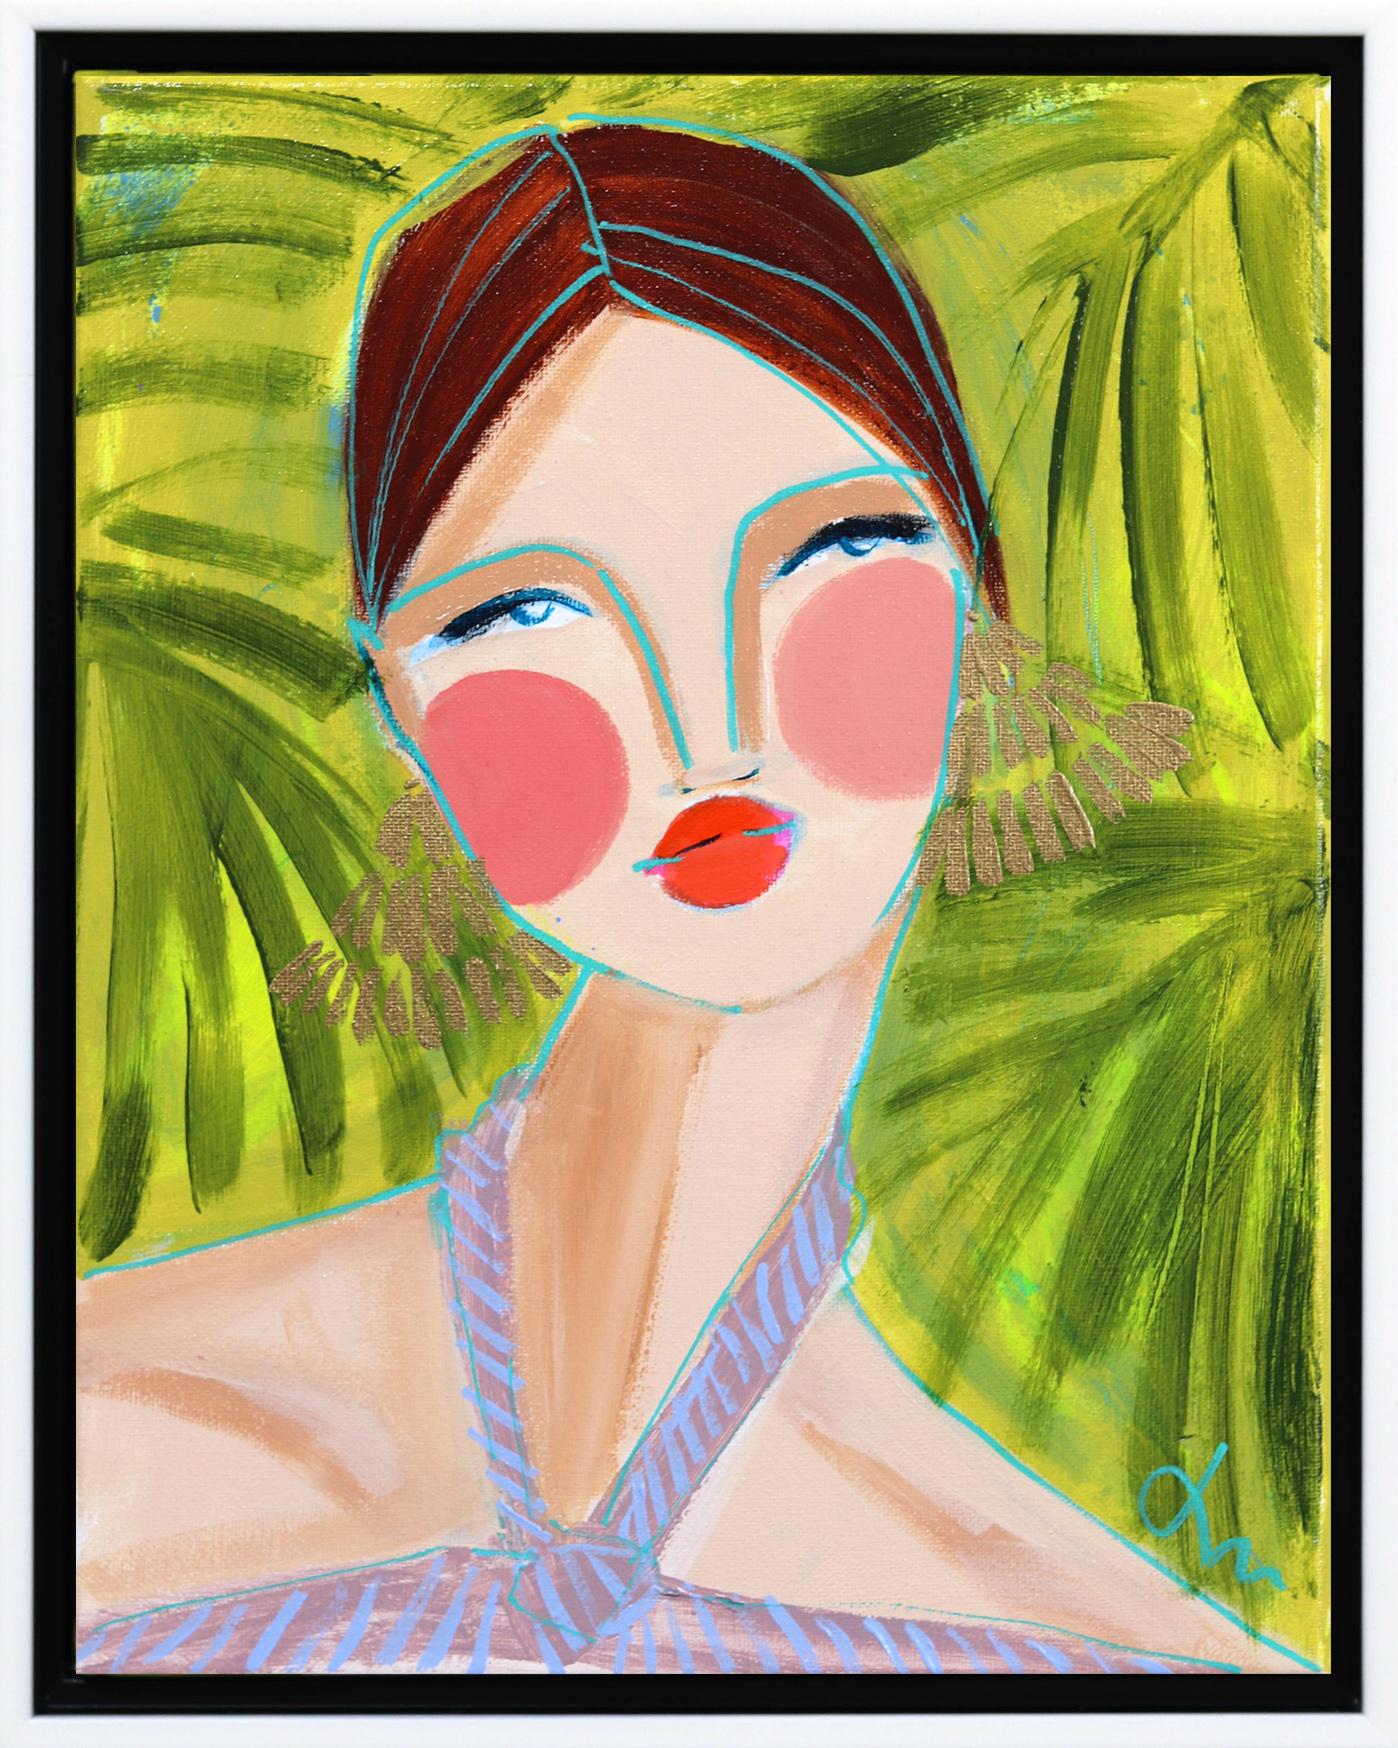 Miss Priss Palms 2 - Colorful Abstract Figurative Portrait Original Painting